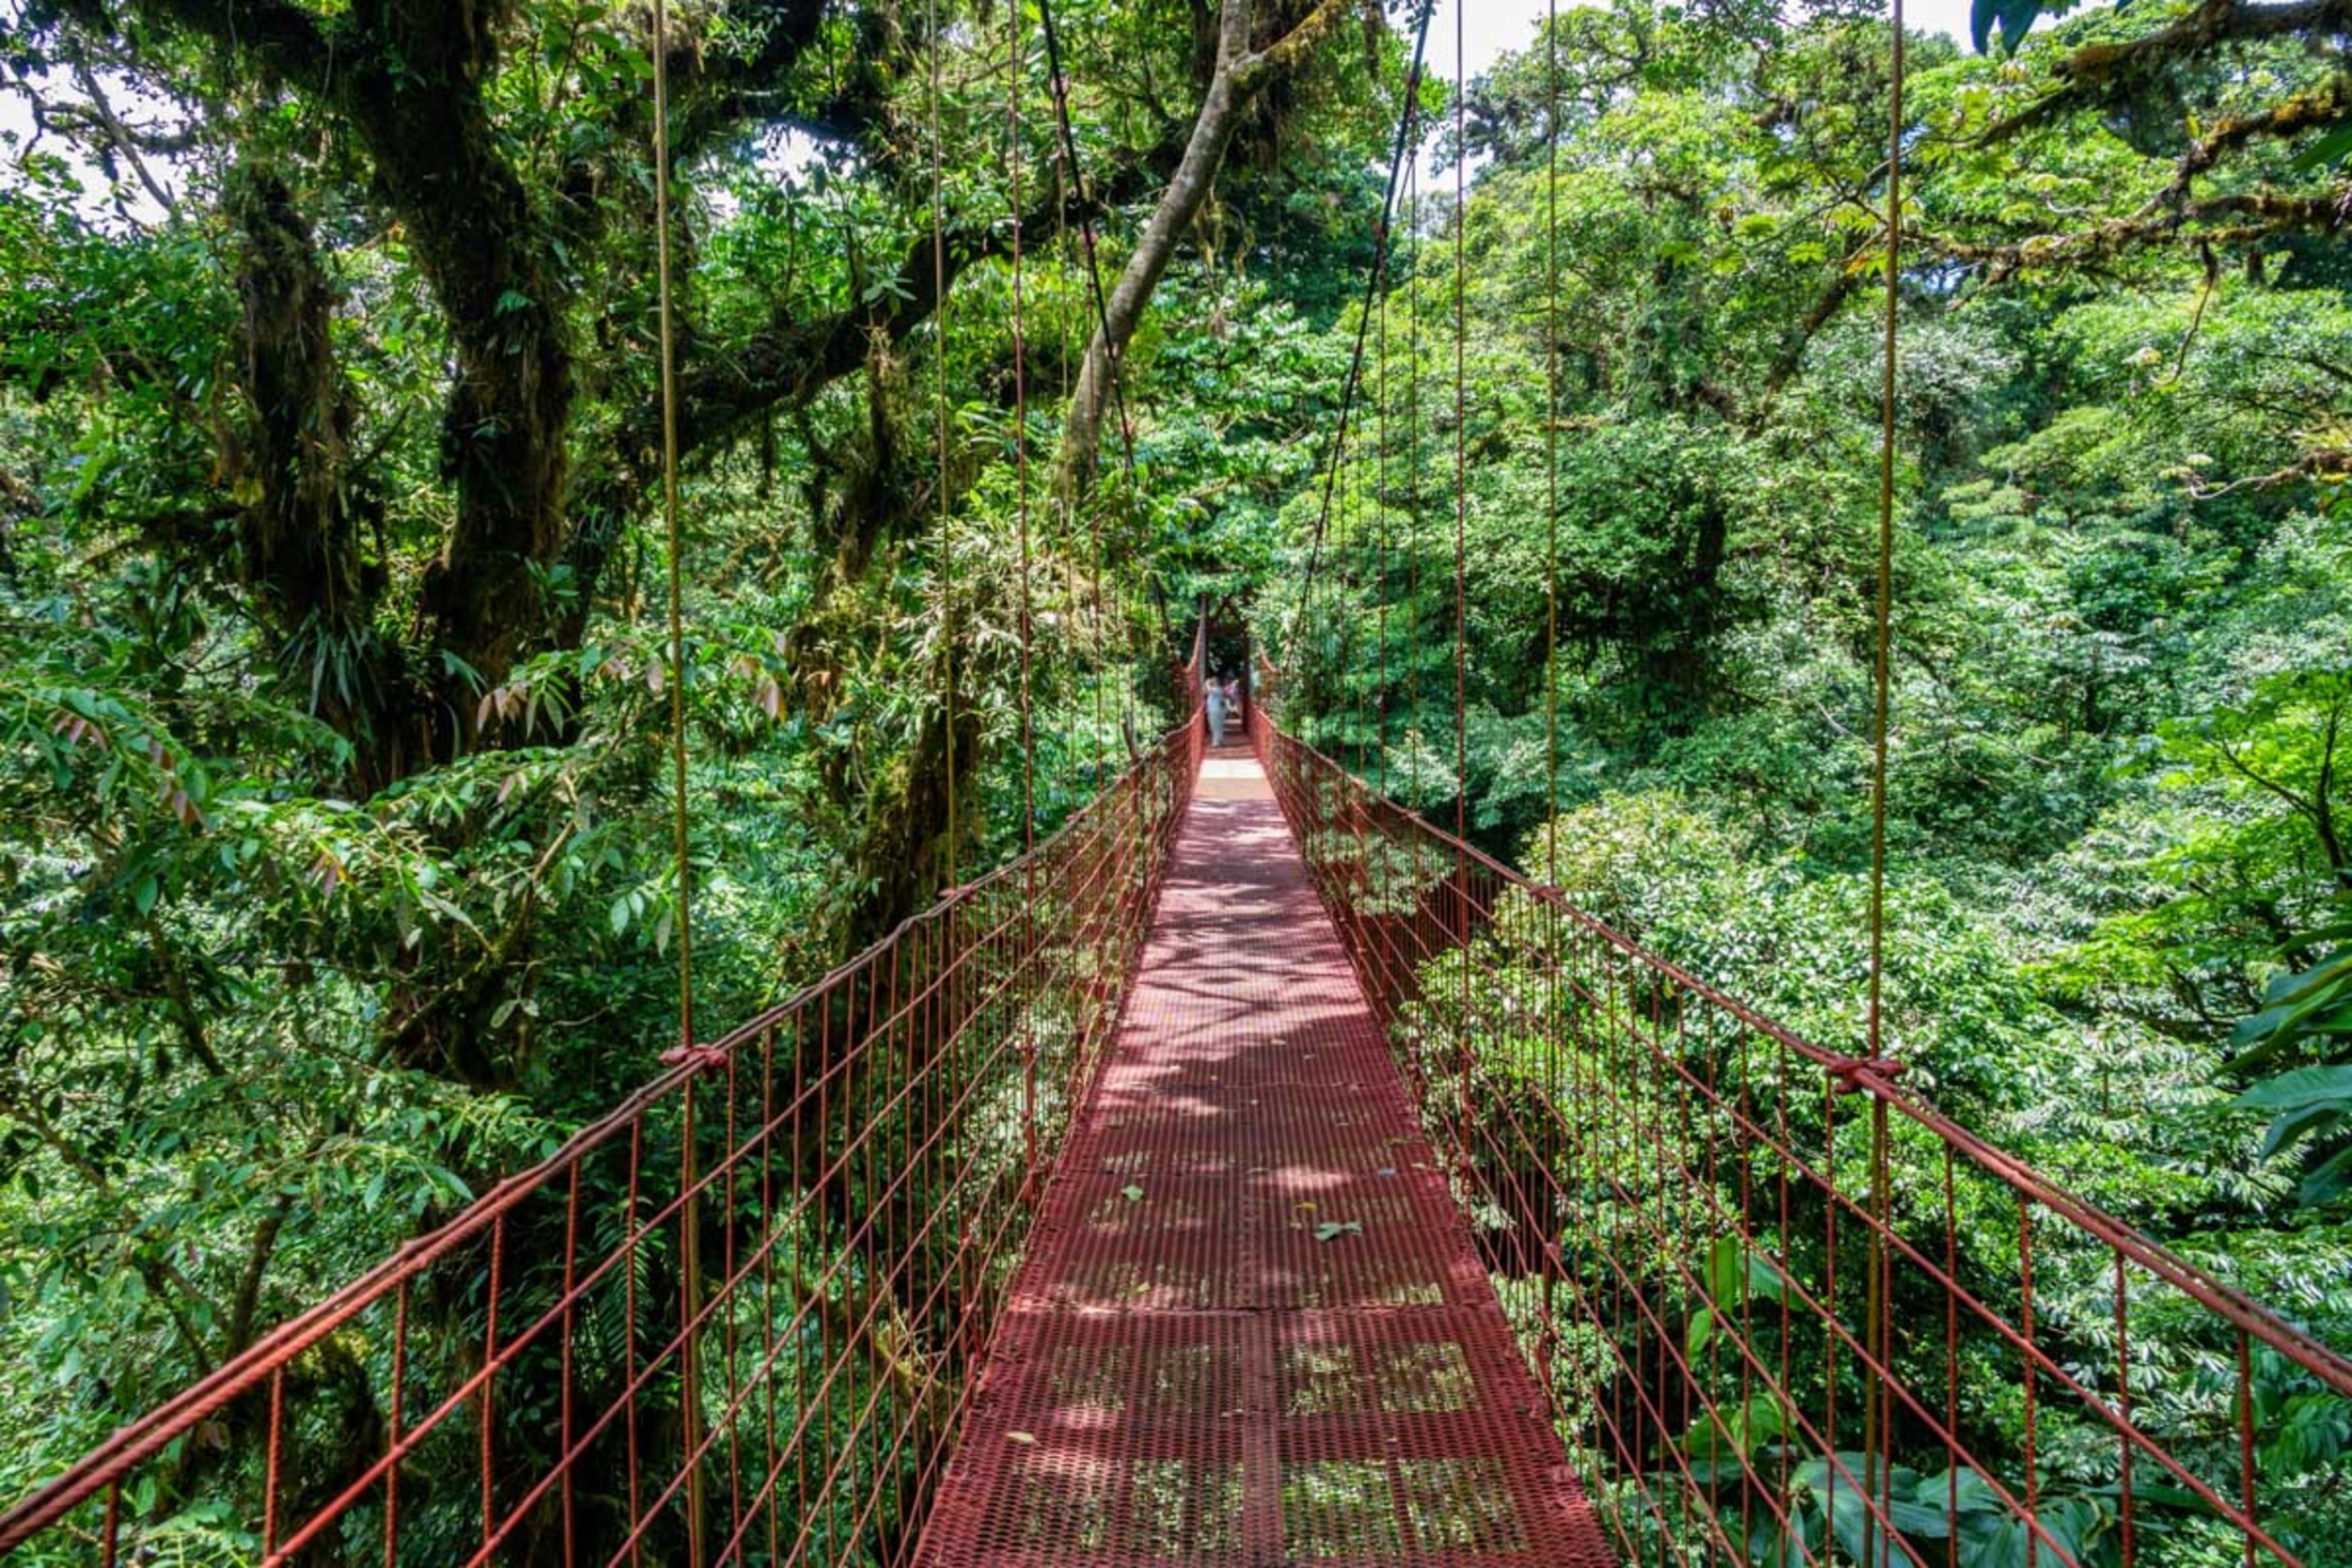 <p>Visiting Monteverde 1,000 years ago, you might have found a few differences. There would be no bridges, no zip lines and certainly no tourists. Mostly, though, this cloud forest looks exactly like it did when the first Costa Ricans stumbled upon its path. It's a thrill to explore a place that hasn't changed in eons, to wander the misty jungle, and feel like you have stepped back in time and discovered a new world and a new form of travel. </p><p><a href='https://www.msn.com/en-us/community/channel/vid-cj9pqbr0vn9in2b6ddcd8sfgpfq6x6utp44fssrv6mc2gtybw0us'>Did you enjoy this slideshow? Follow us on MSN to see more of our exclusive lifestyle content.</a></p>